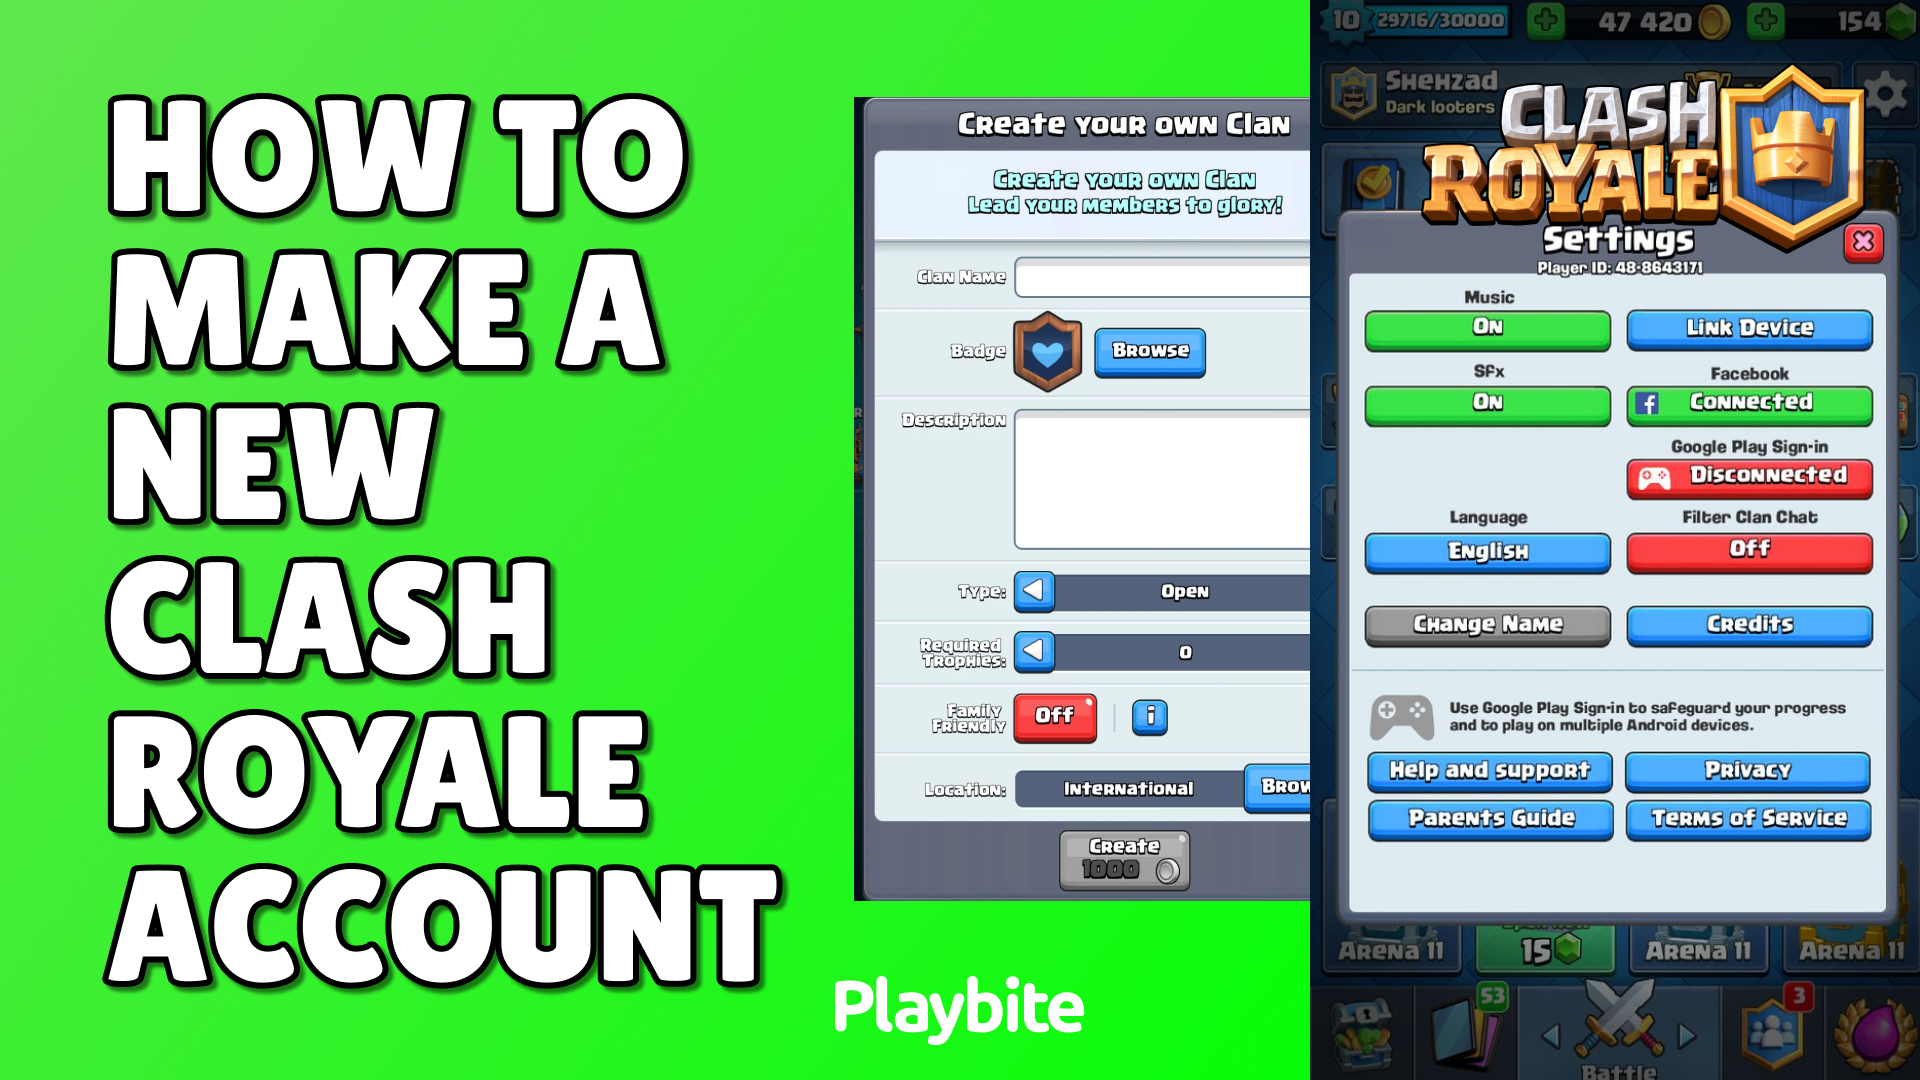 How To Make A New Clash Royale Account